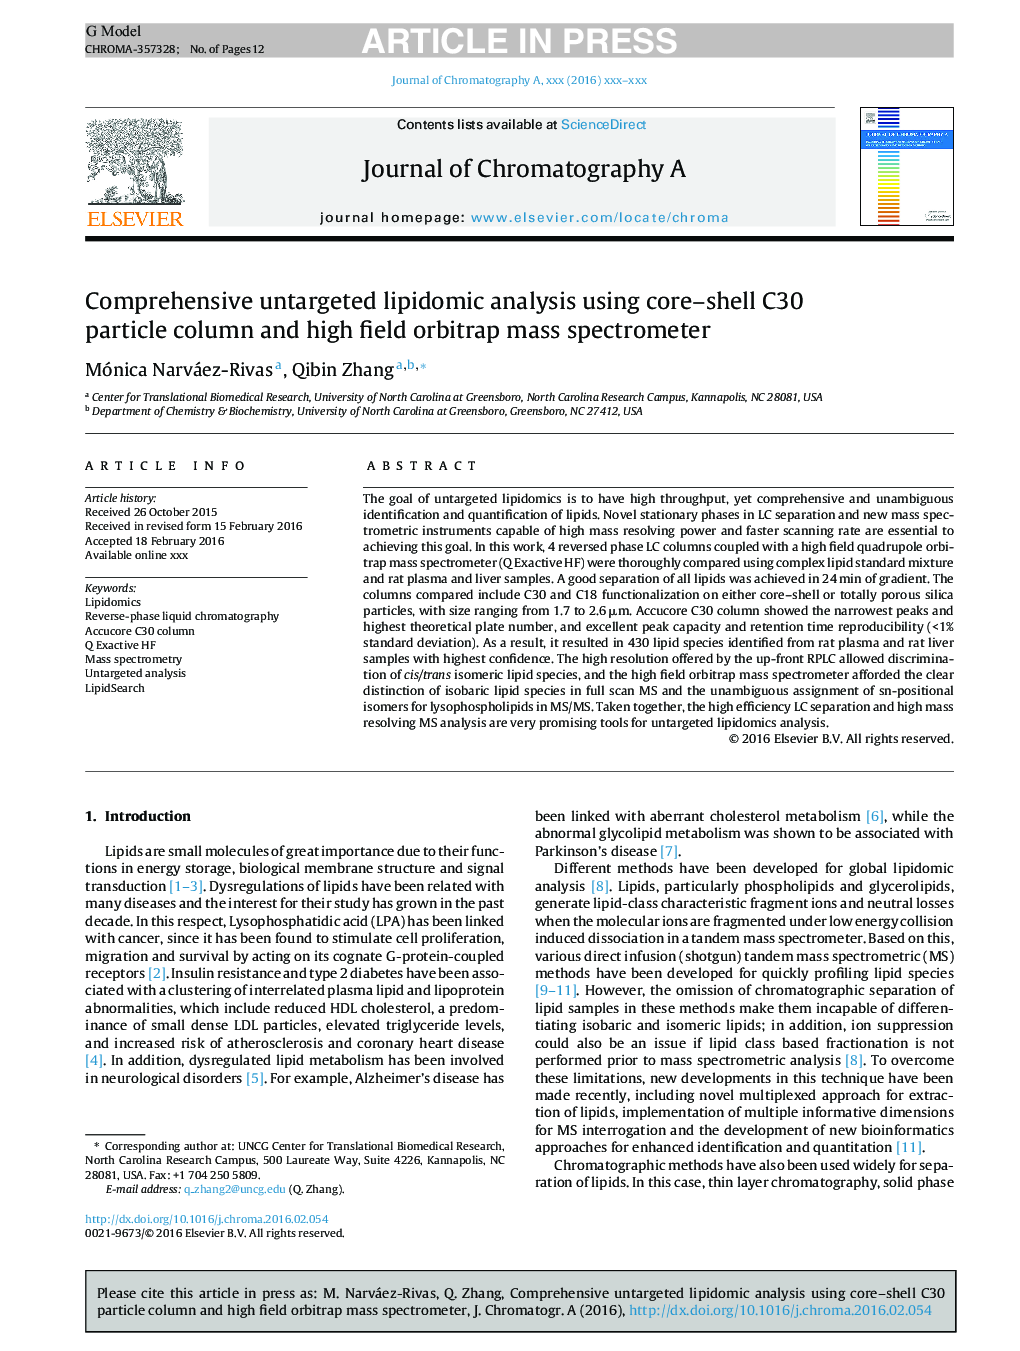 Comprehensive untargeted lipidomic analysis using core-shell C30 particle column and high field orbitrap mass spectrometer